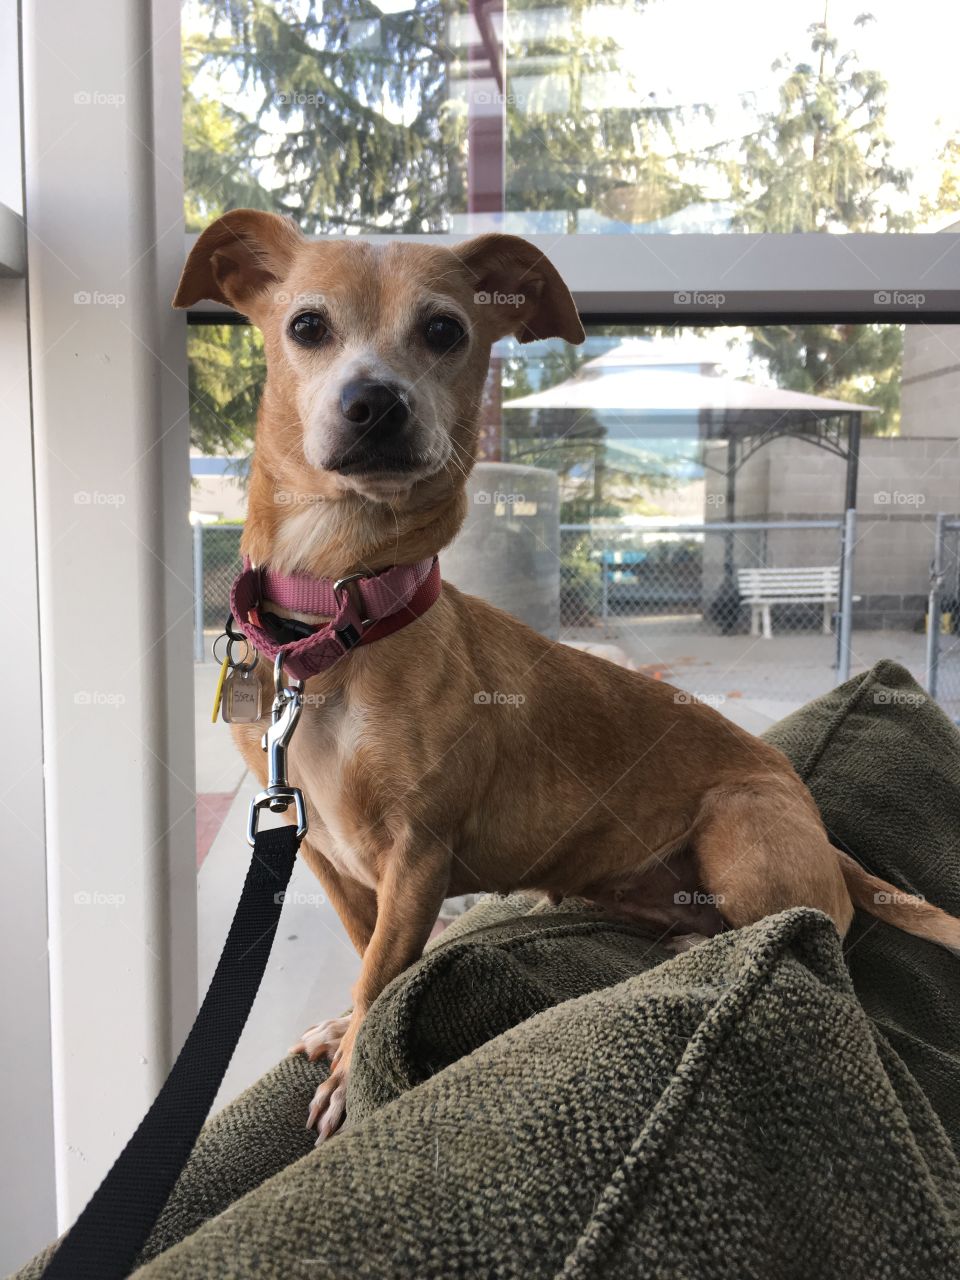 Ms. Waffle, Chihuahua Mix, Senior pup
Sweet, quiet, loves to cuddle and give doggie kisses!  